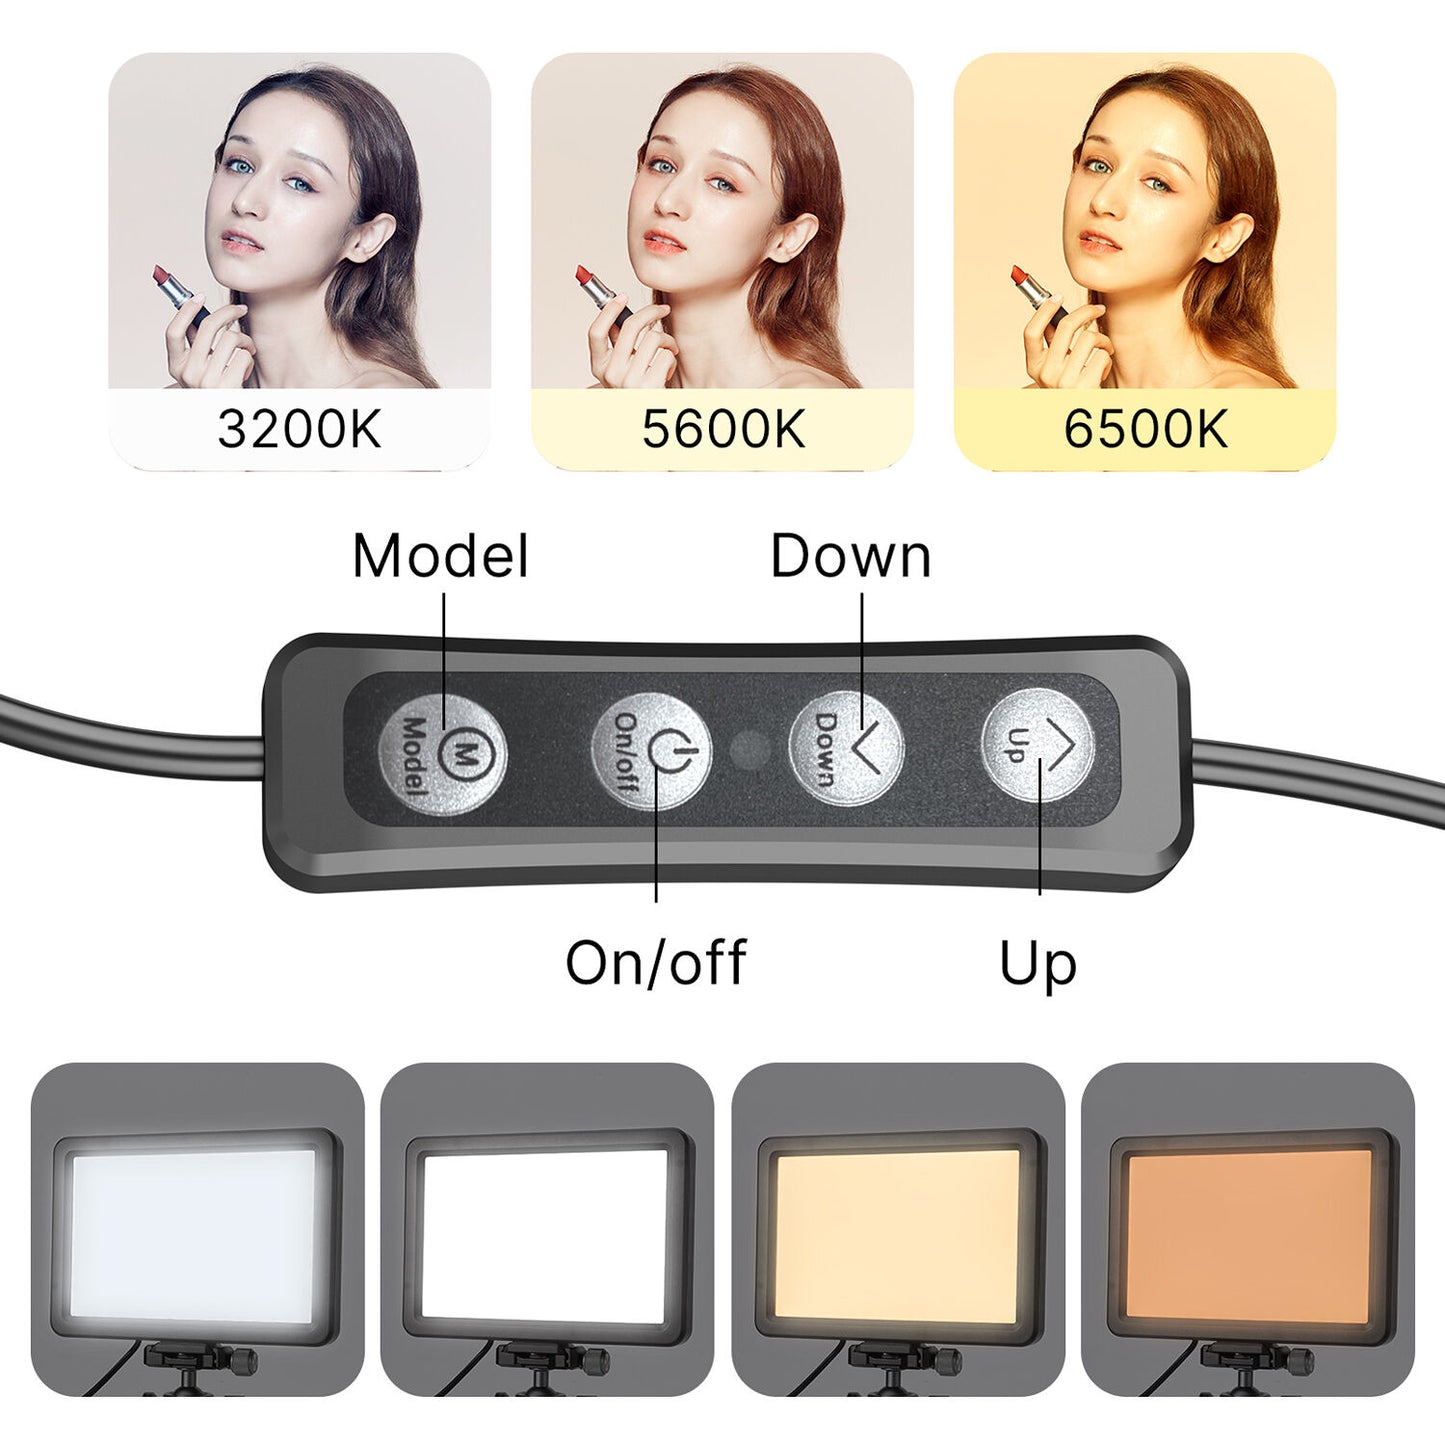 Vijim by Ulanzi VL108C Bi-Color Fill Light LED Panel Camera Video Lighting 3200K to 6500K Color Temperature with Controller for Vlog Photography Livestreaming